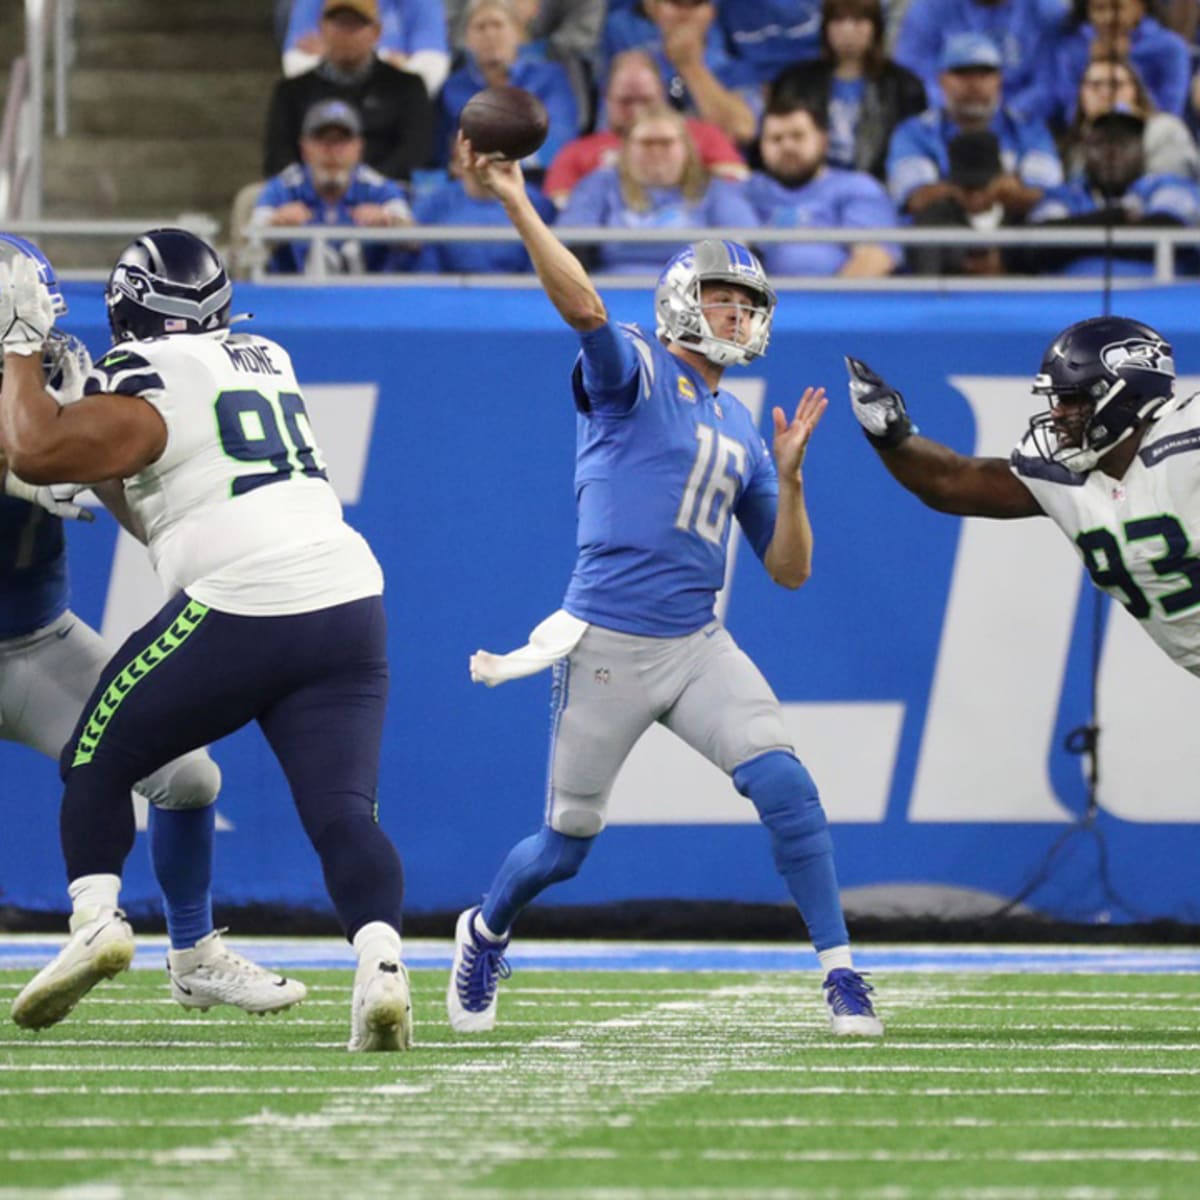 Ironies of life: Seahawks eliminate Lions, while needing Detroit to avoid  the same fate